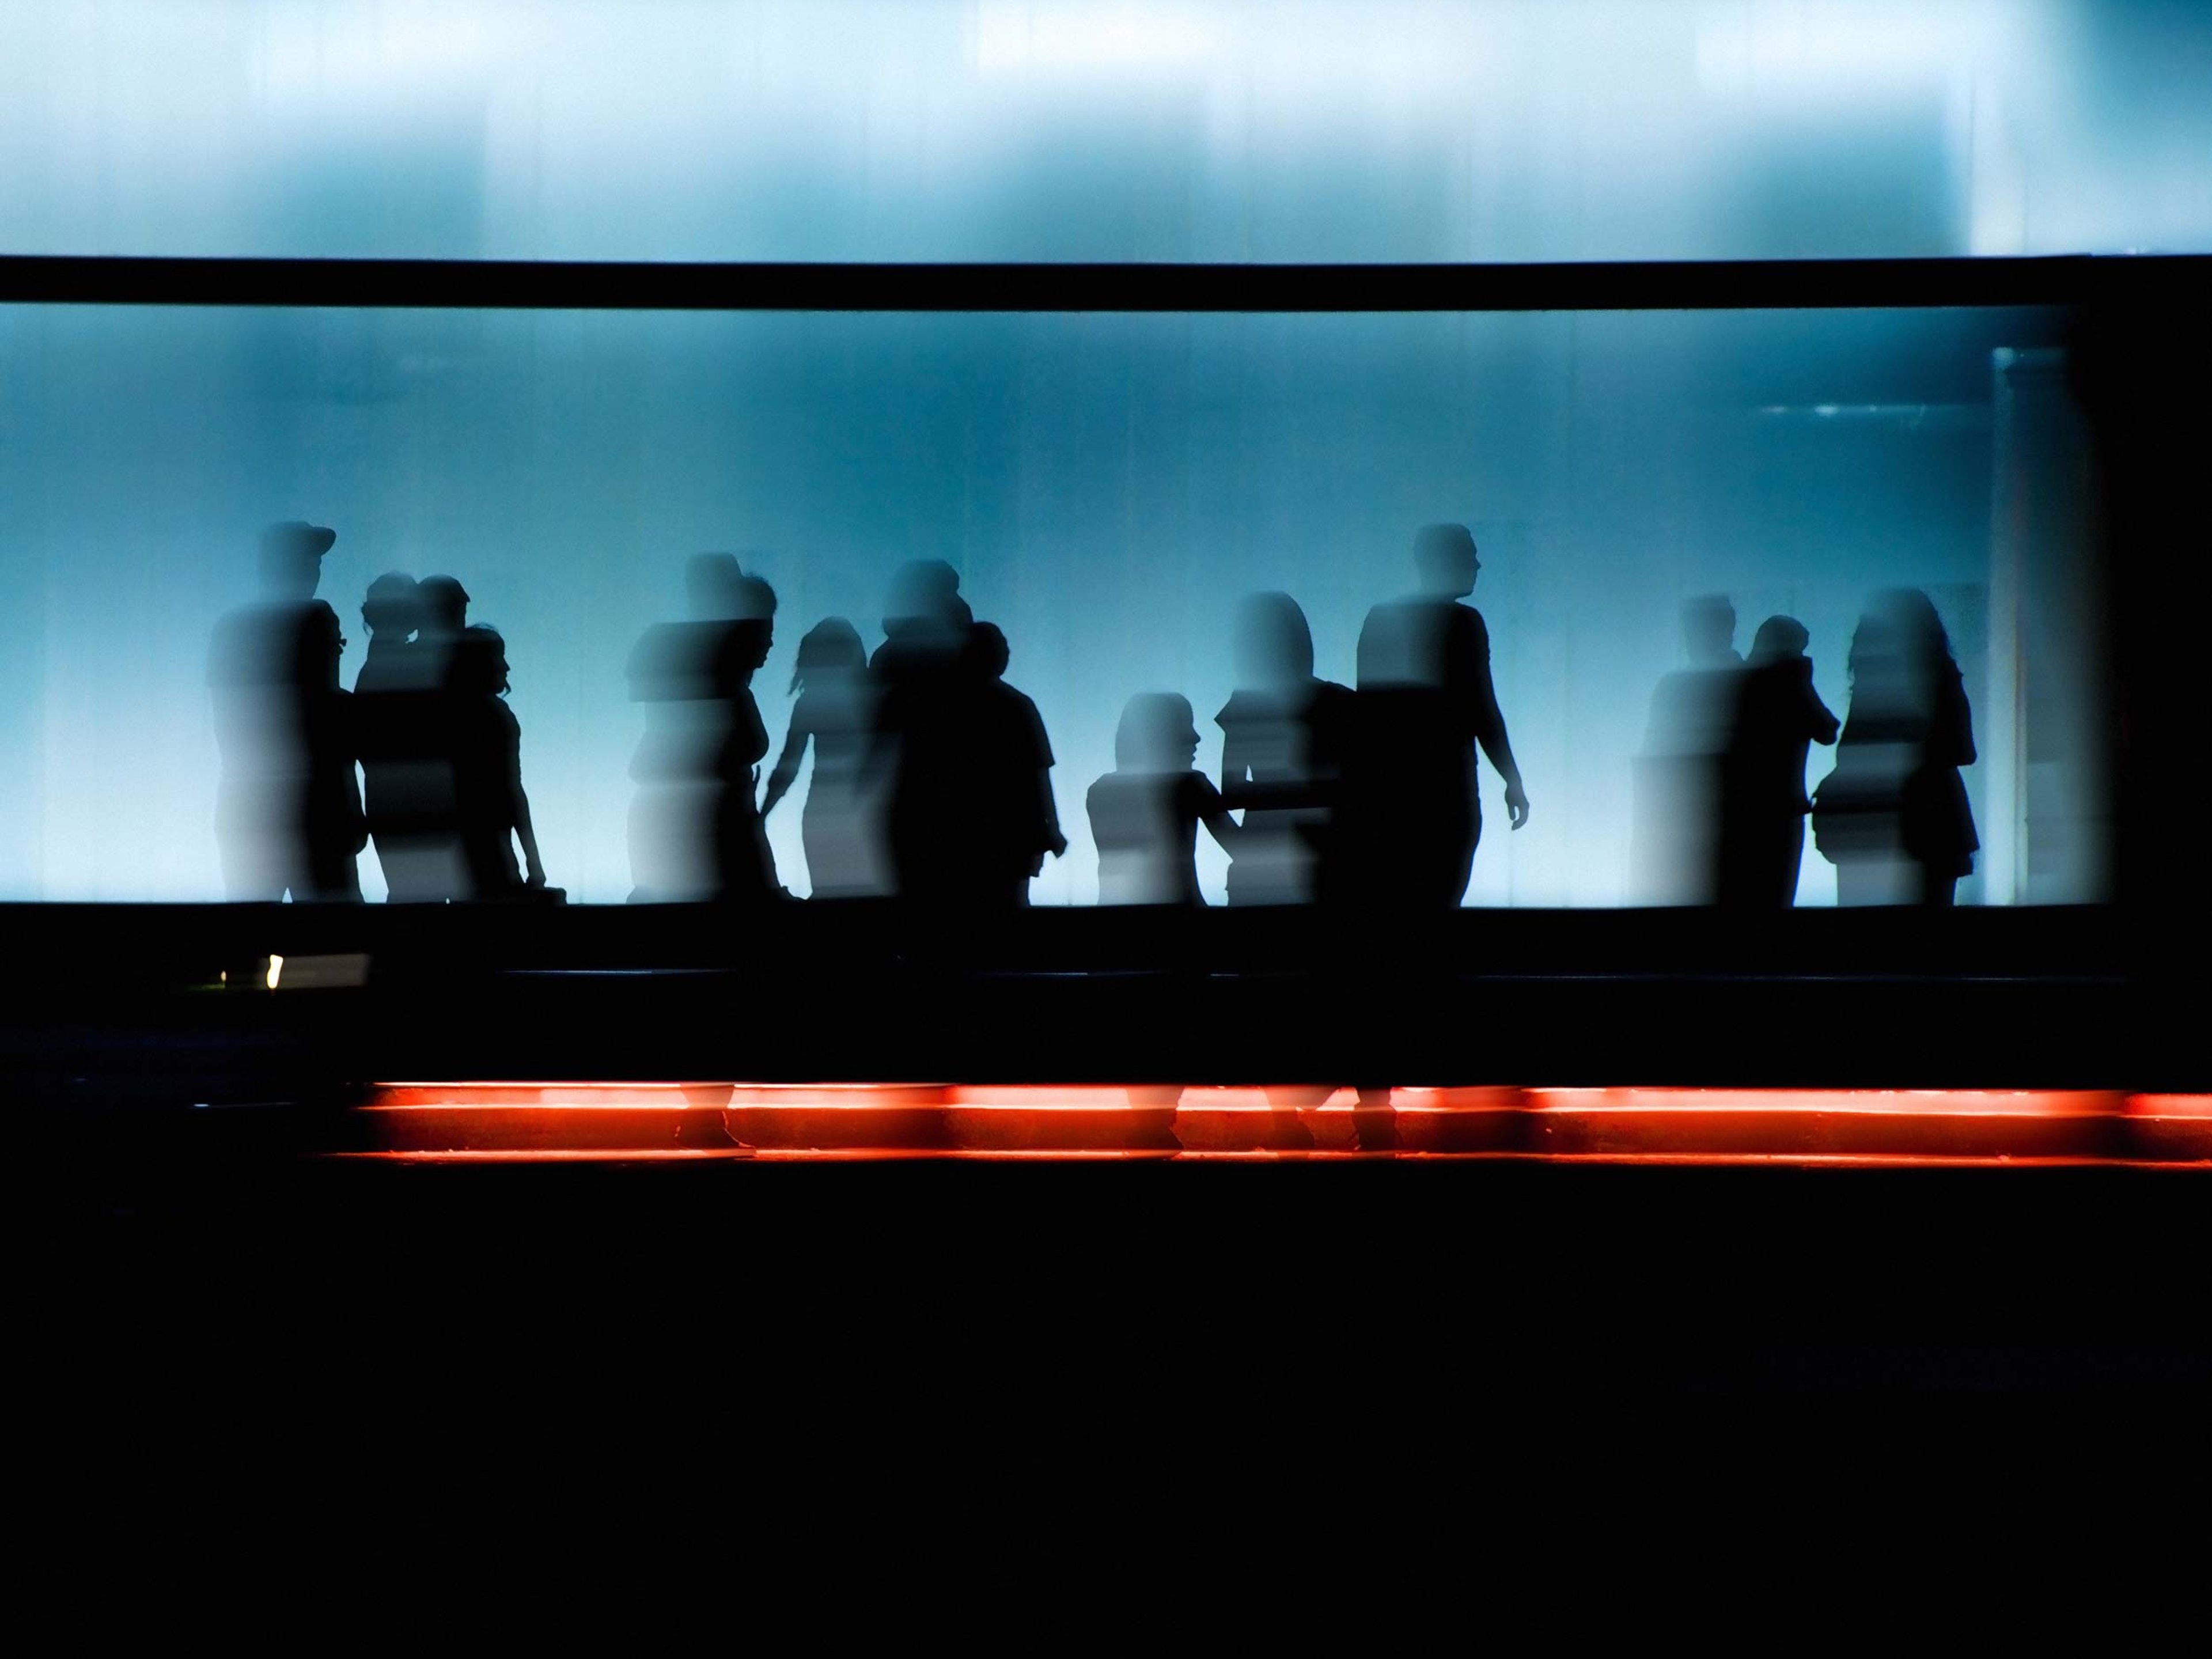 Silhouettes of people in motion blur with a red trail of light.